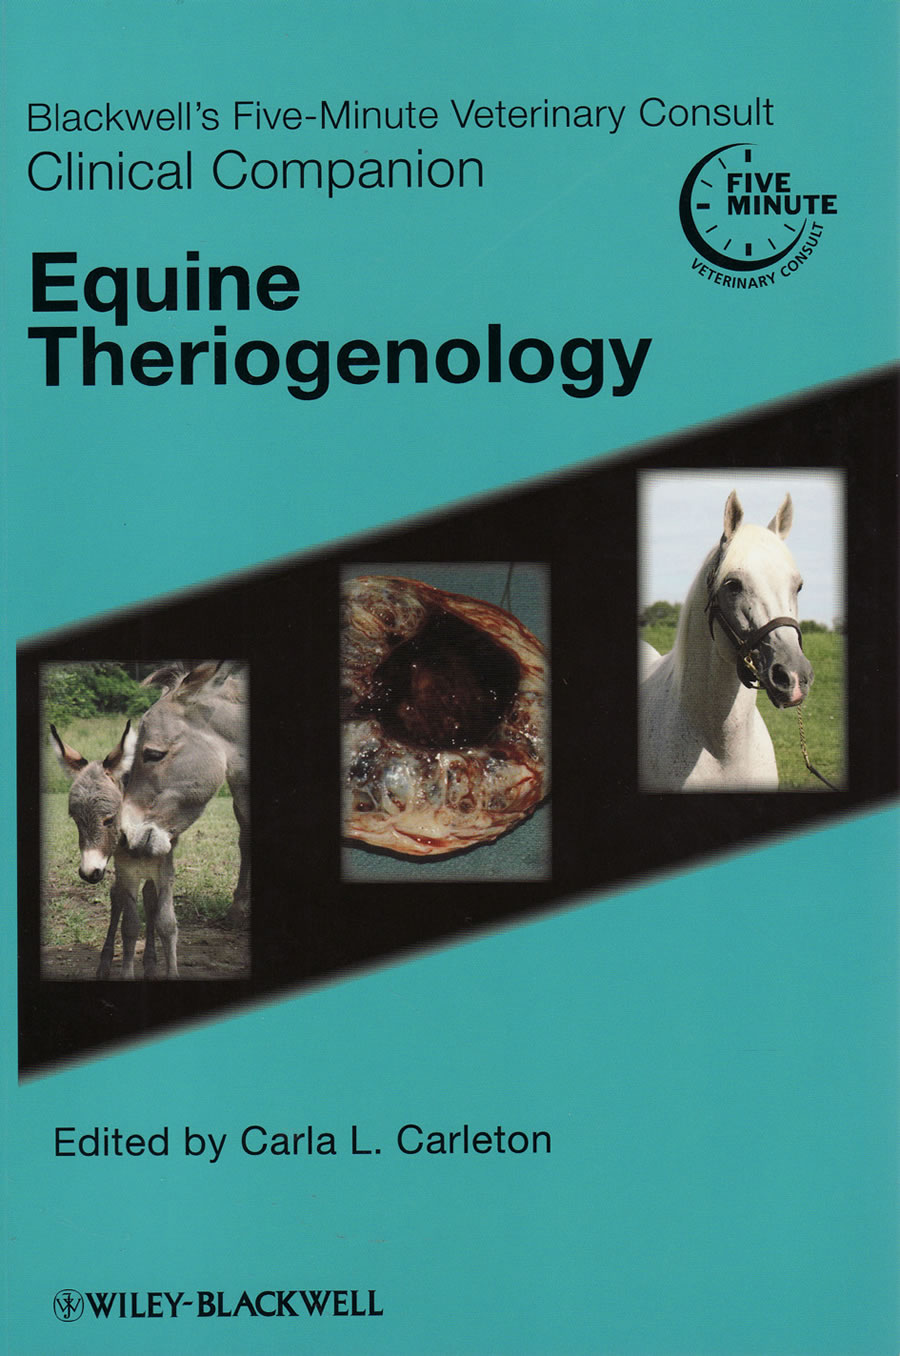 Blackwell's five-minute veterinary consult clinical companion. Equine theriogenology